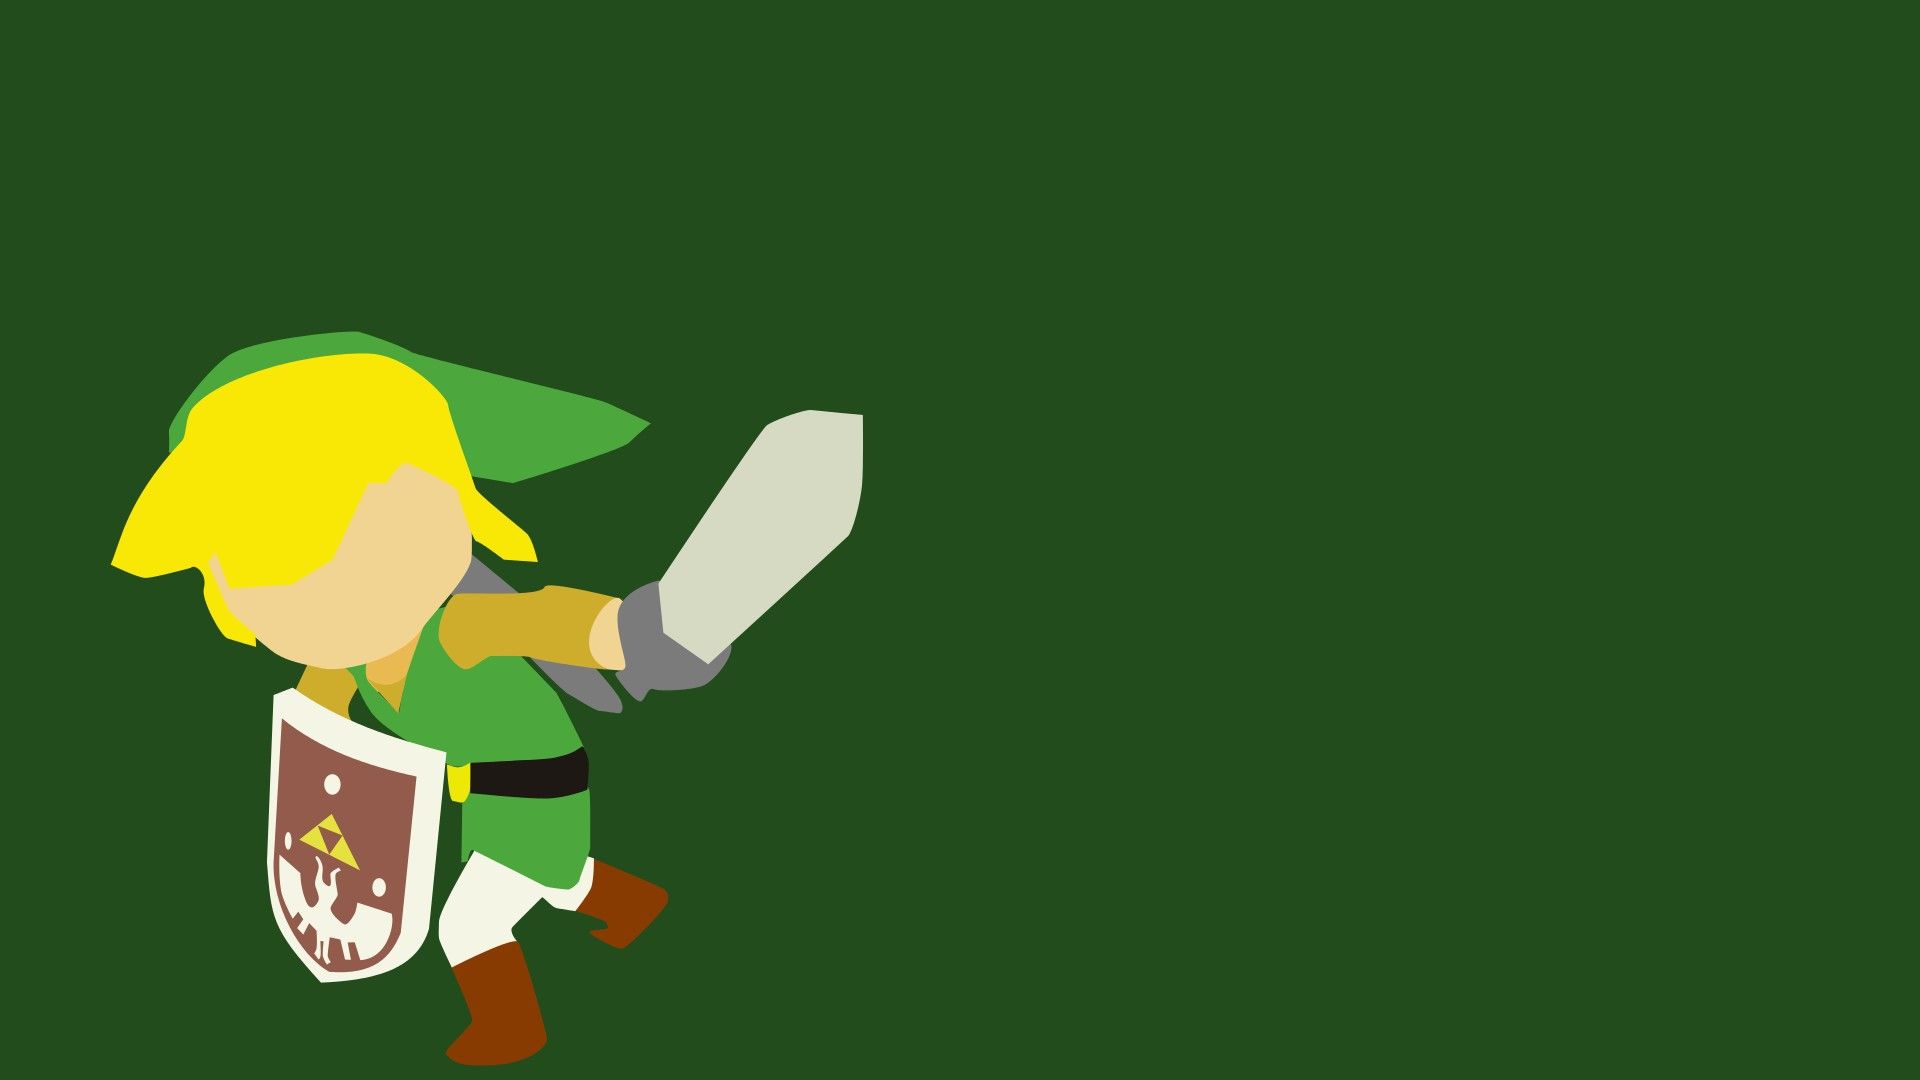 Minimalist Video Game Wallpapers